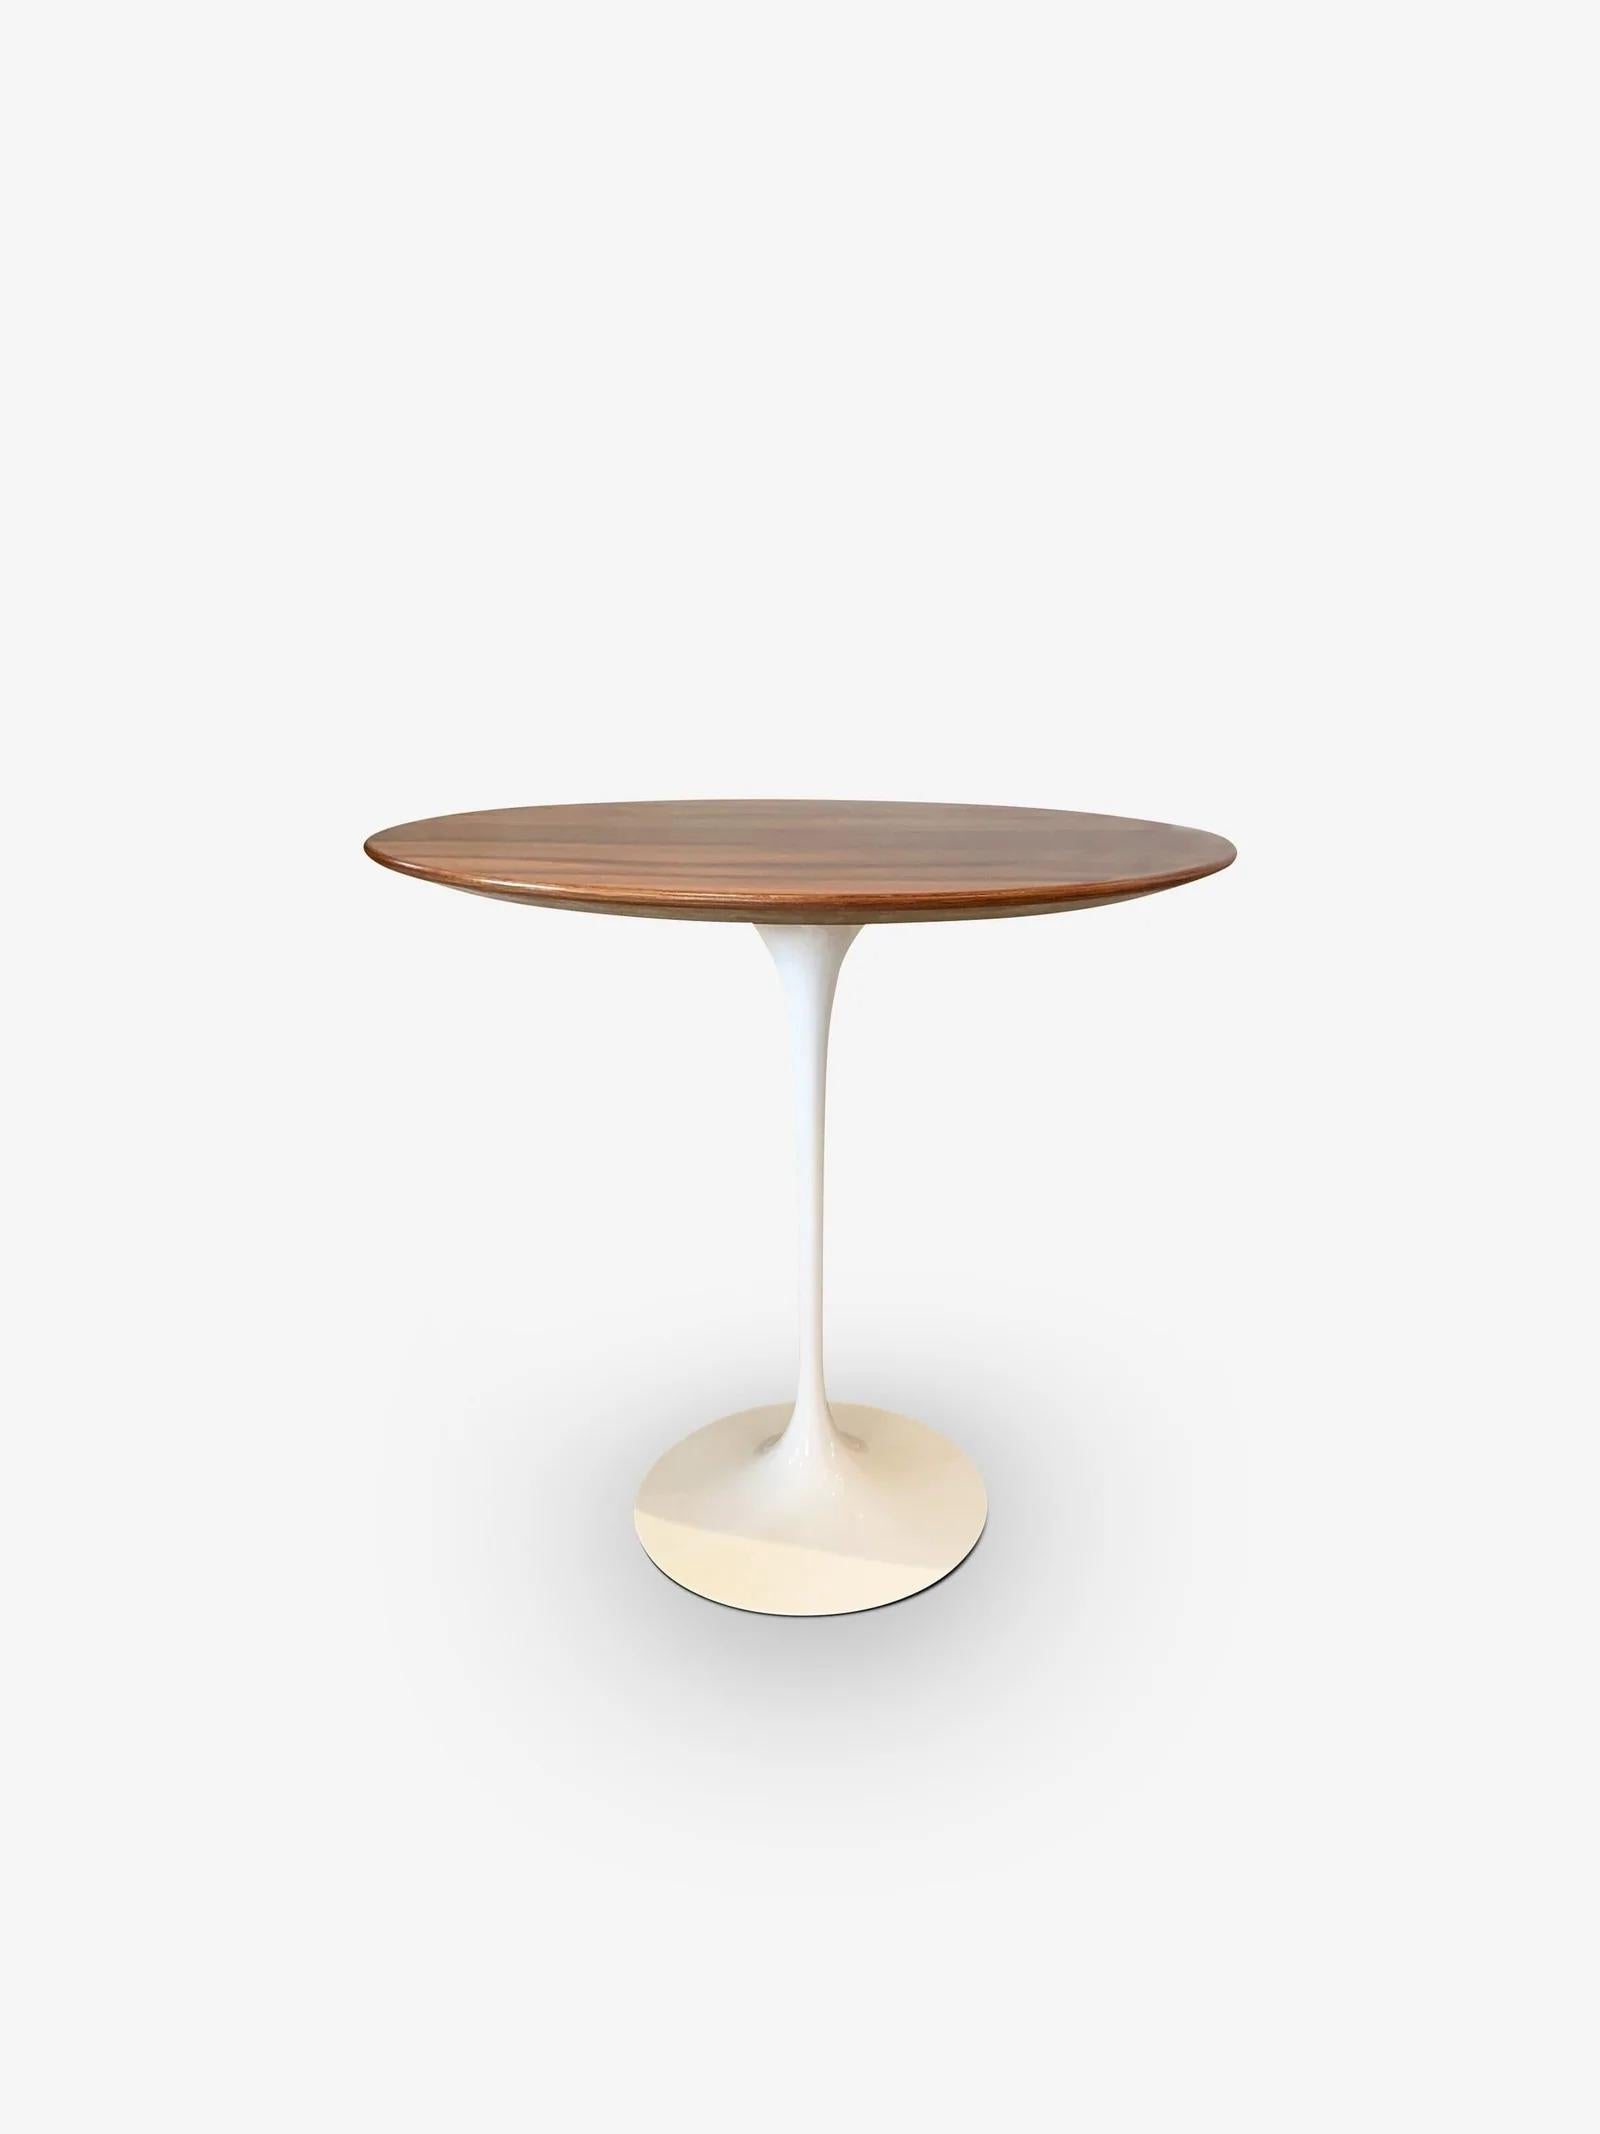 American Eero Saarinen Oval Side Table with Rosewood & White Base For Sale